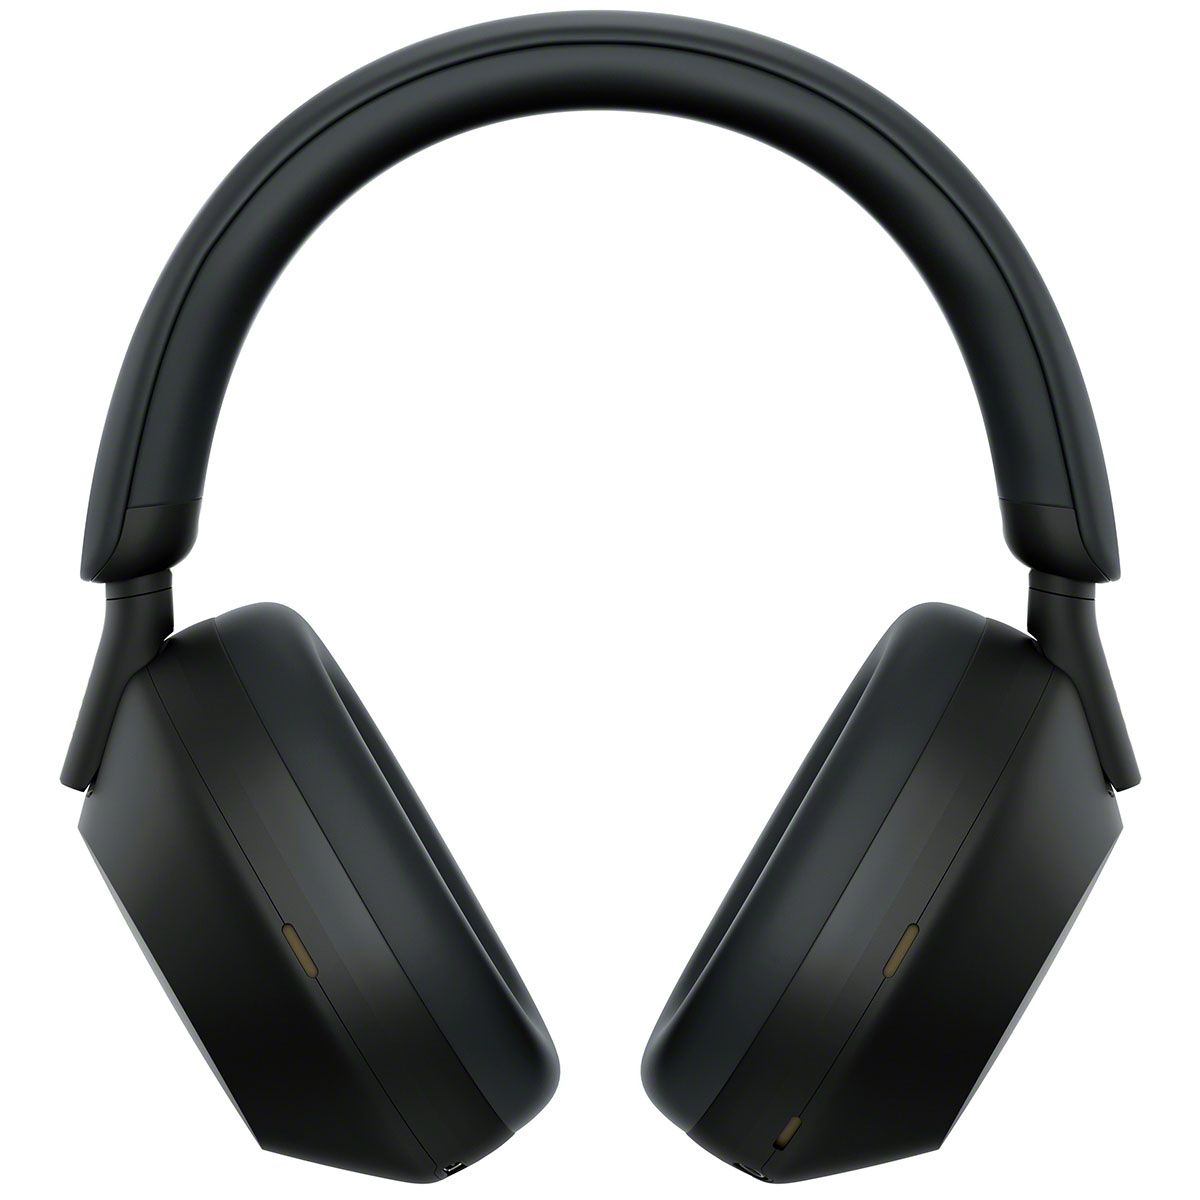 Sony WH-1000XM5 Wireless Over-Ear Headphones - Black - Straight View